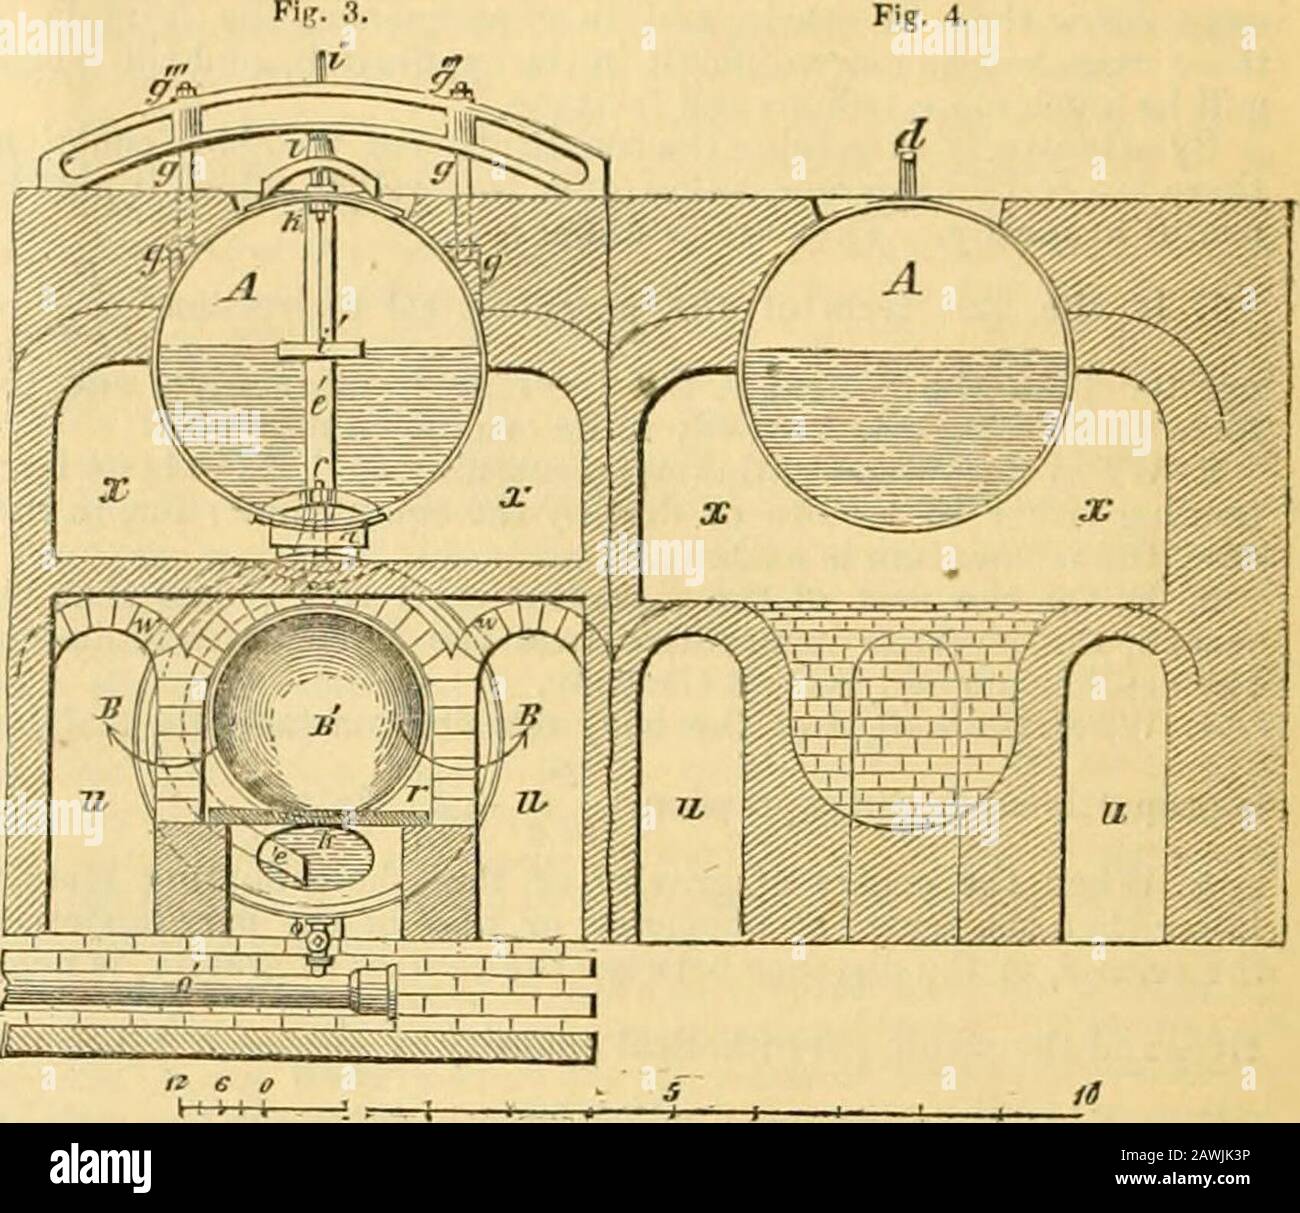 The Civil engineer and architect's journal, scientific and railway gazette . nerators axis has 26 feet, its diameter 4 feet, while thelength of its heater is only 14, feet, its diameter 4 ft. 6 in., and,notwithstanding this, its heating surface is twice as much as theheating surface of the boiler itself, which is here 150 square feet.In reducing the 300 square feet of the inner and outer surface ofthe heater to 120 square feet of effective heating surface, the wholeapparatus has 150 and 120, or 270 square feet of heating surface.This divided by one square yard, or 9 square feet, per horse powe Stock Photo